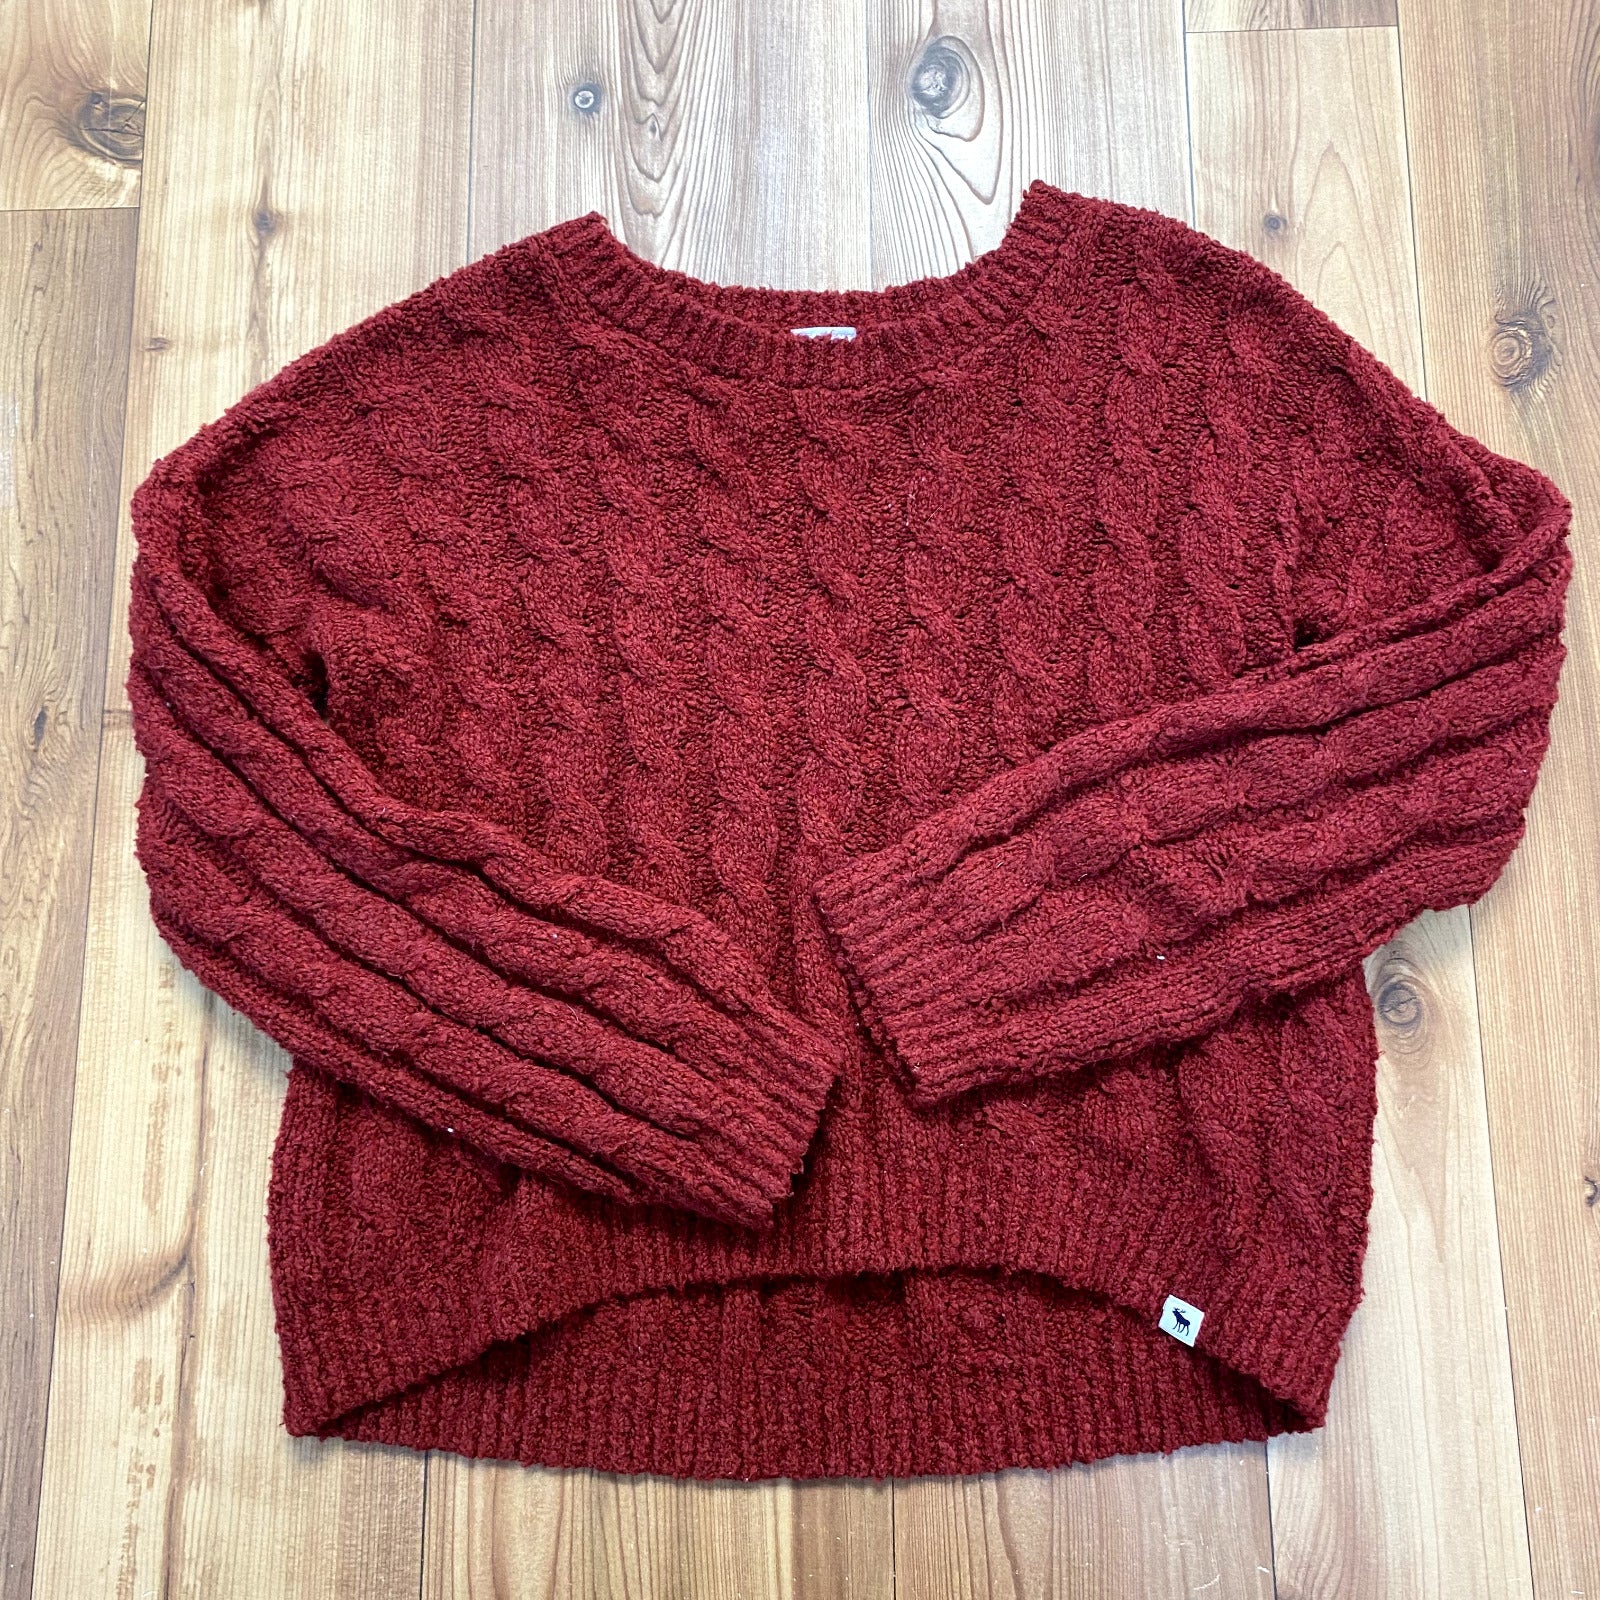 Abercrombie Kids Red Knitted Pullover Long Sleeve Sweater Youth Size 13/14